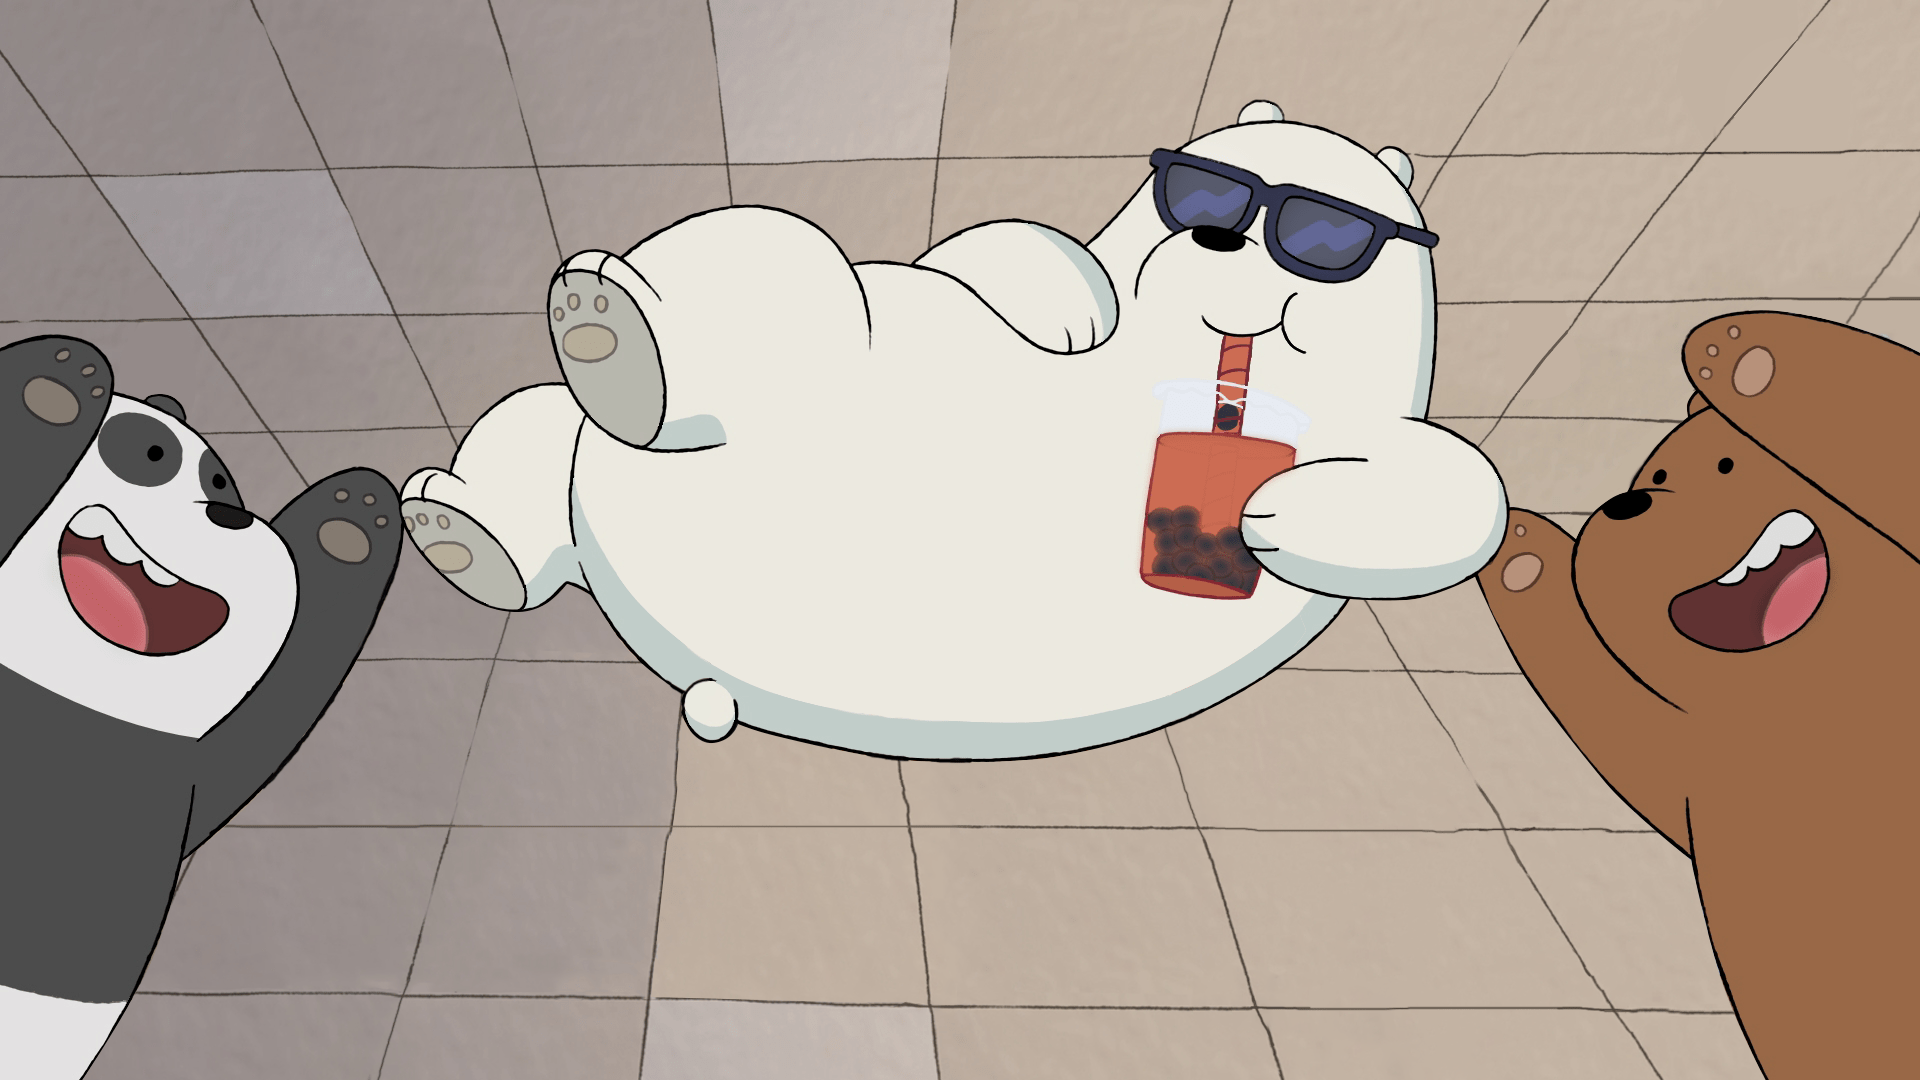 Three bears lay on the ground, one holding a drink. - We Bare Bears